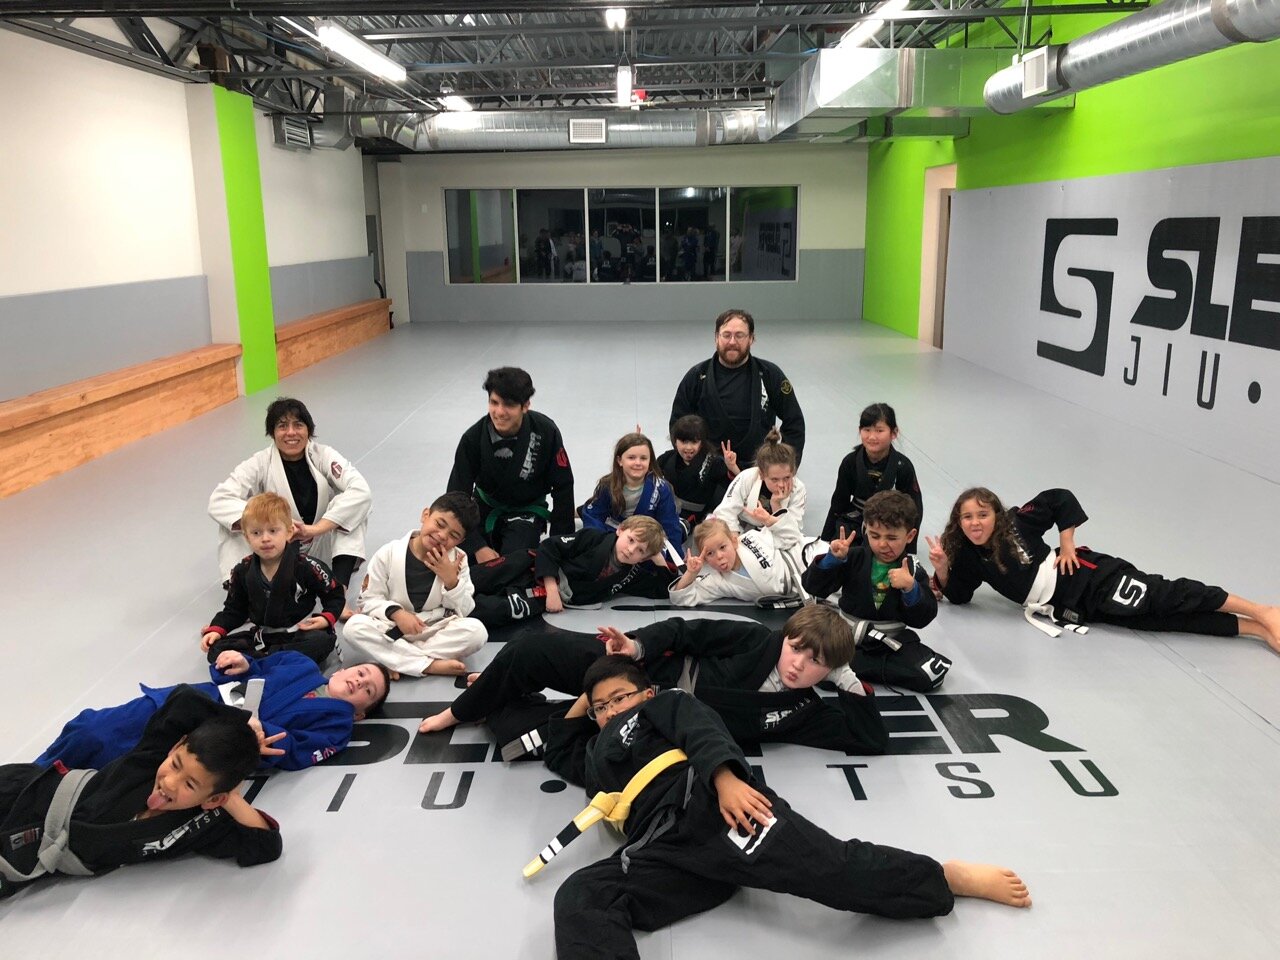 winter 2019 kids promotions - 18 of 18 silly team.jpg